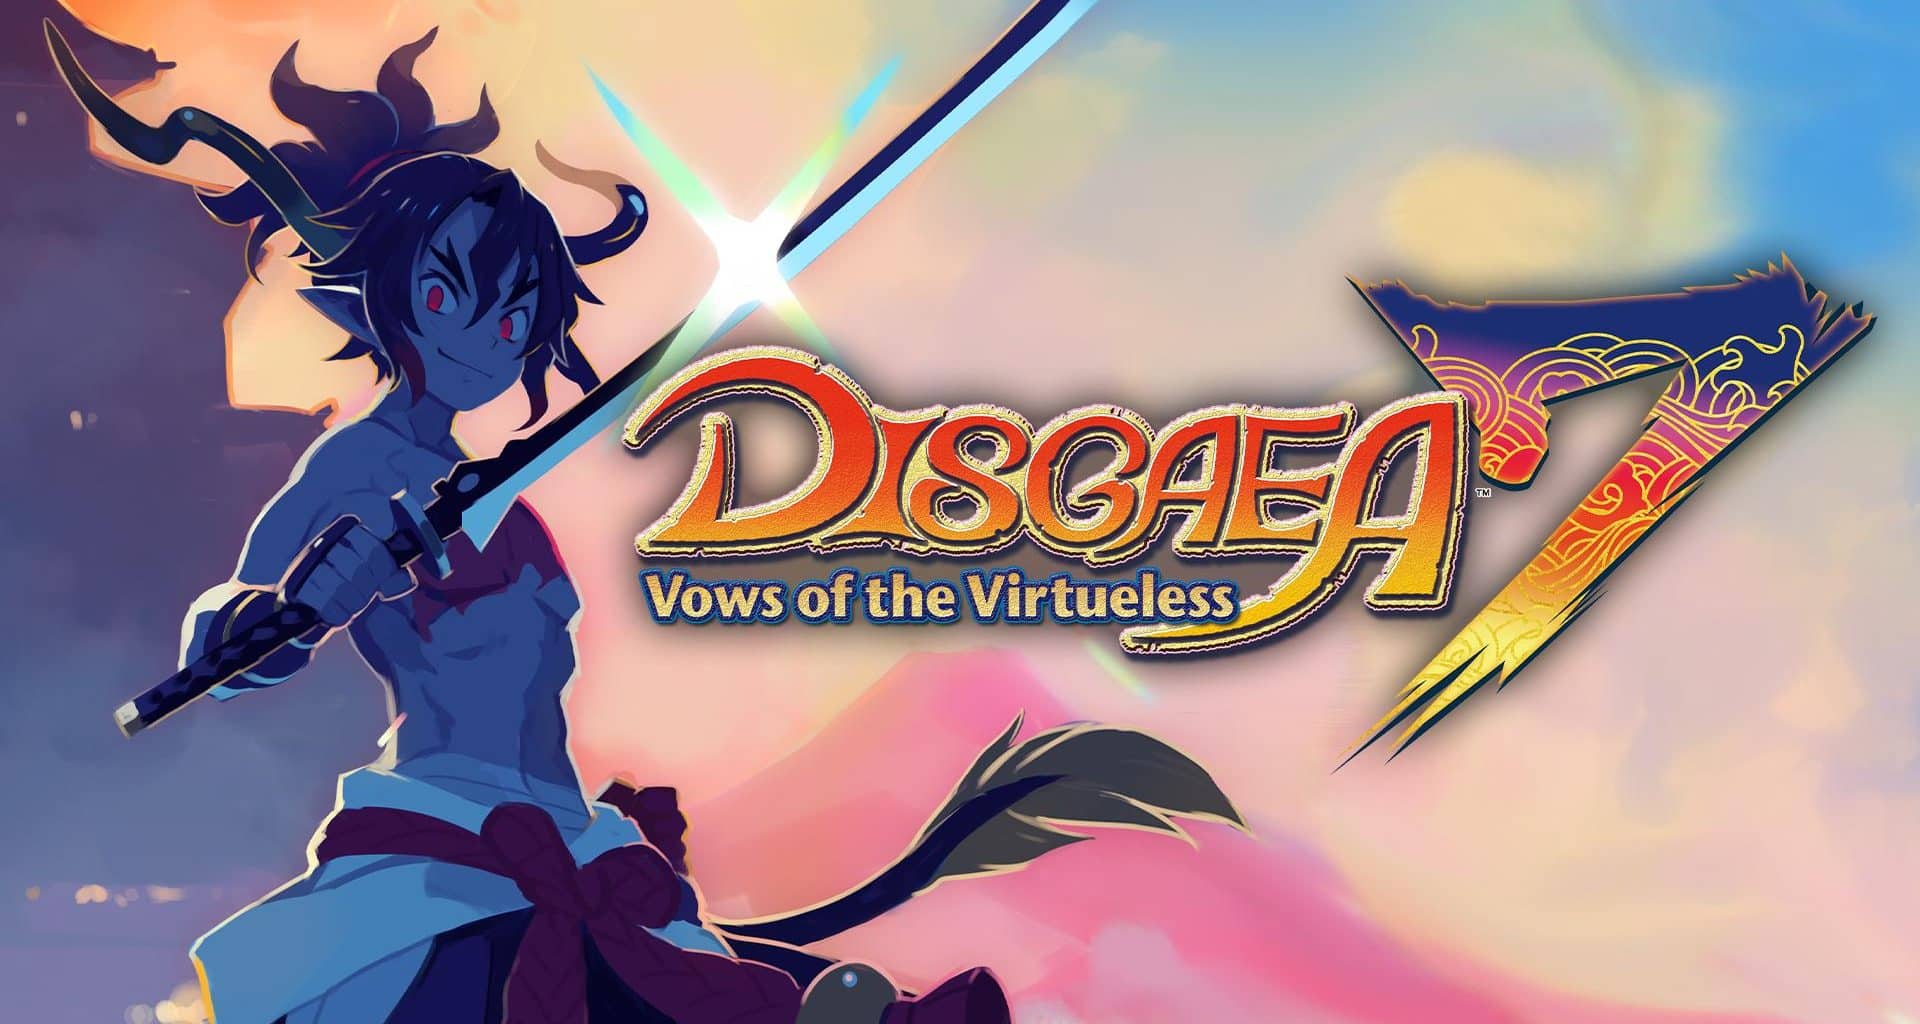 Disgaea 7: Vows of the Virtueless Character Trailer Released 1